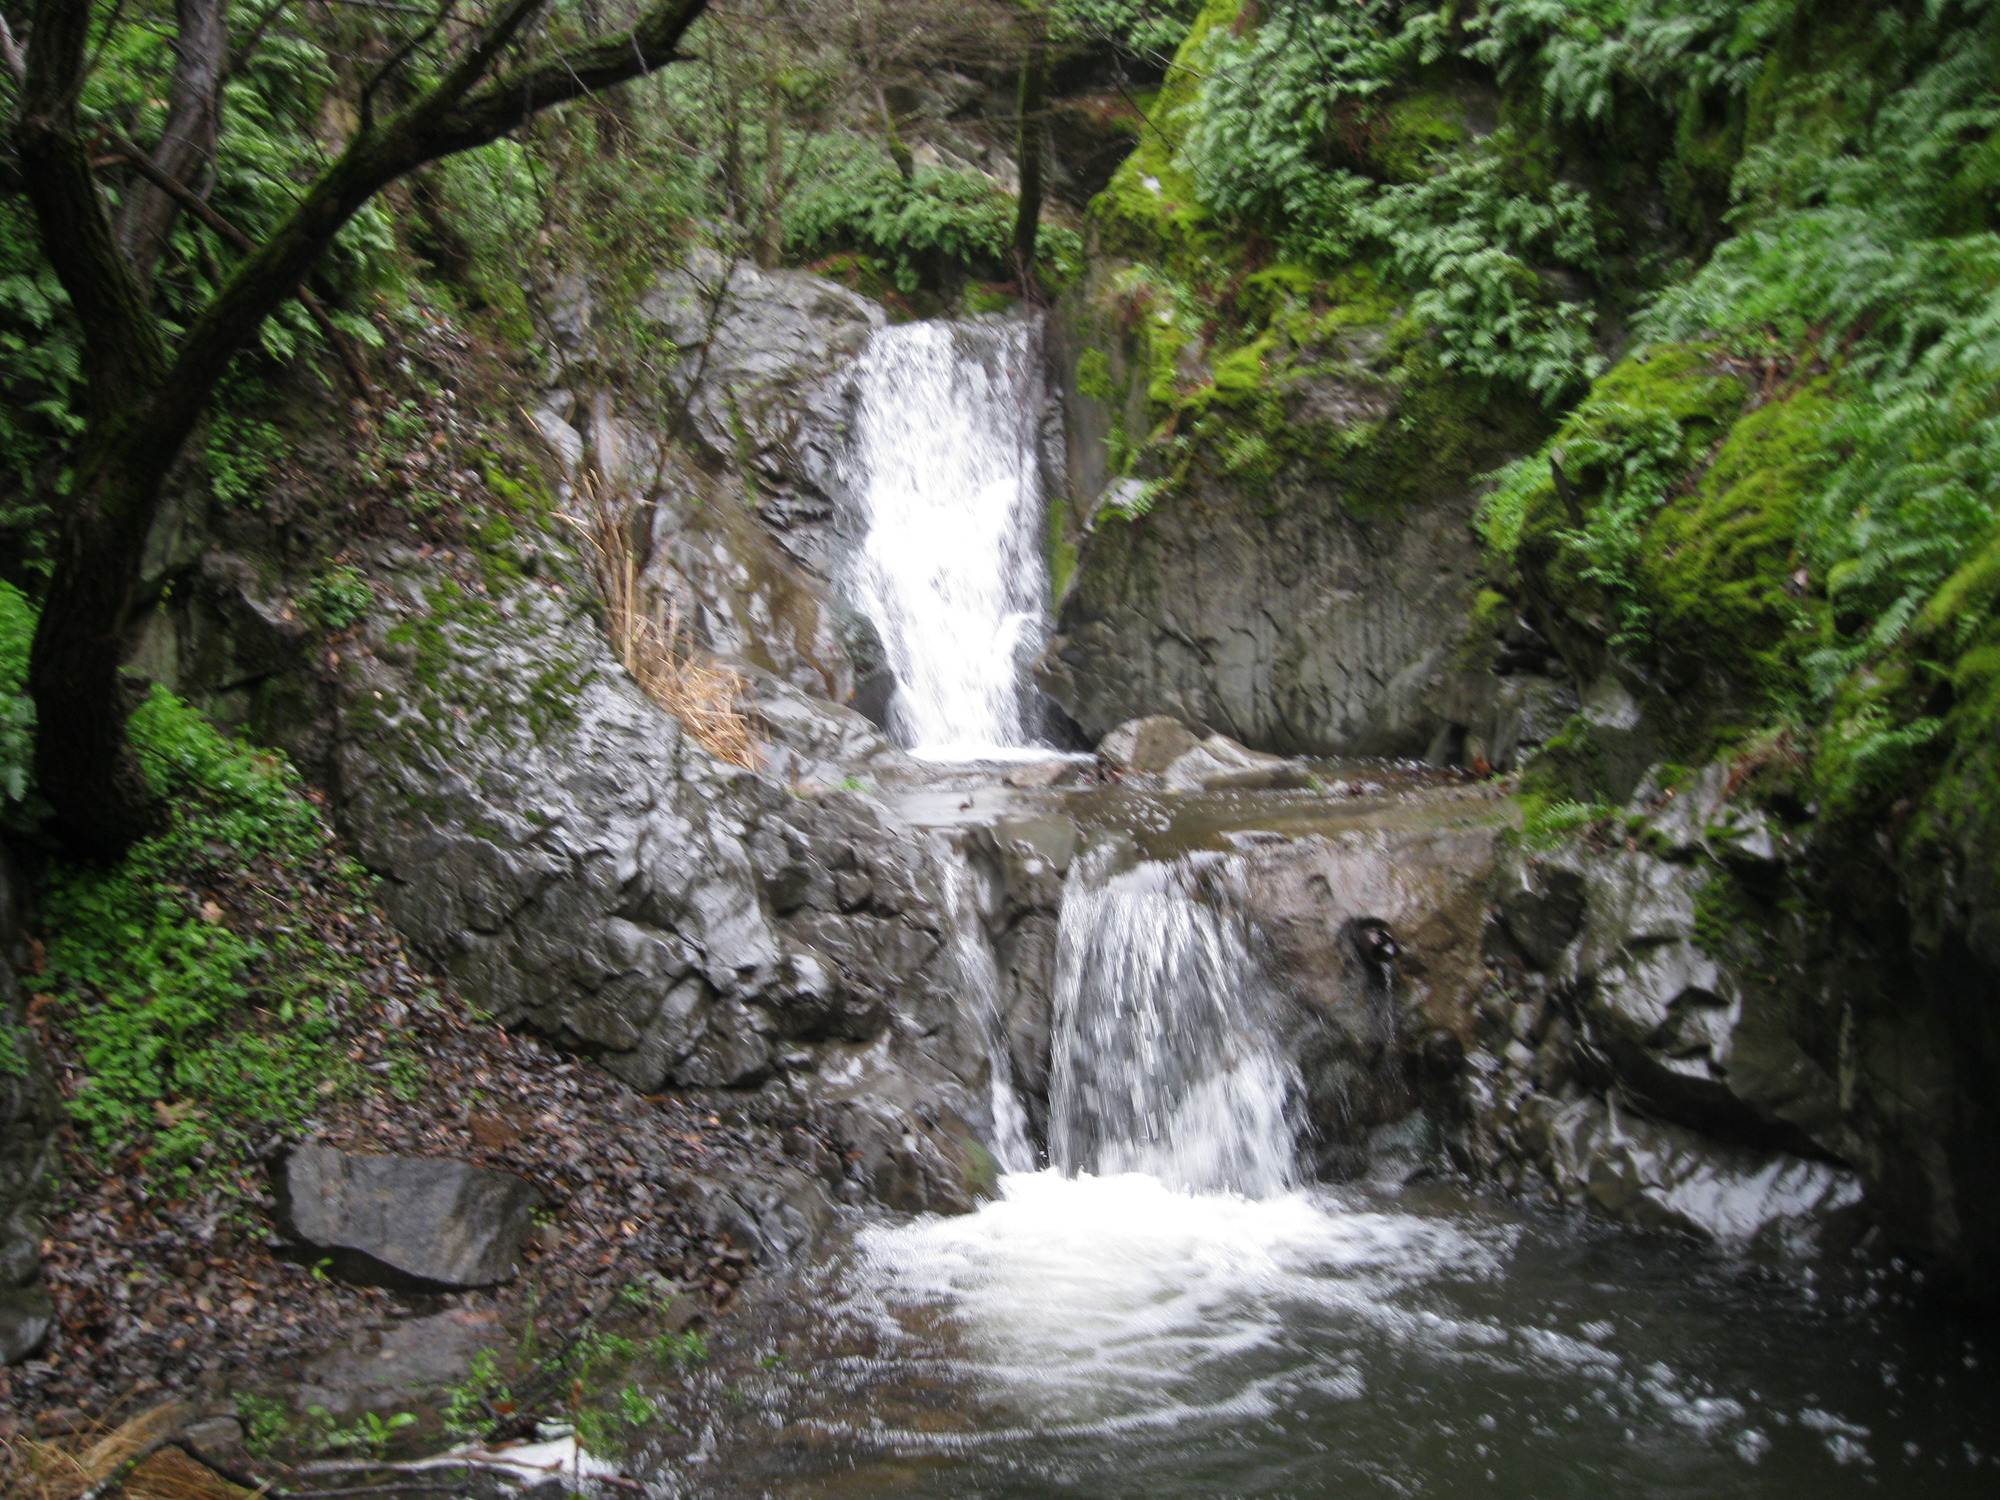 One of the many waterfalls in alum rock park.